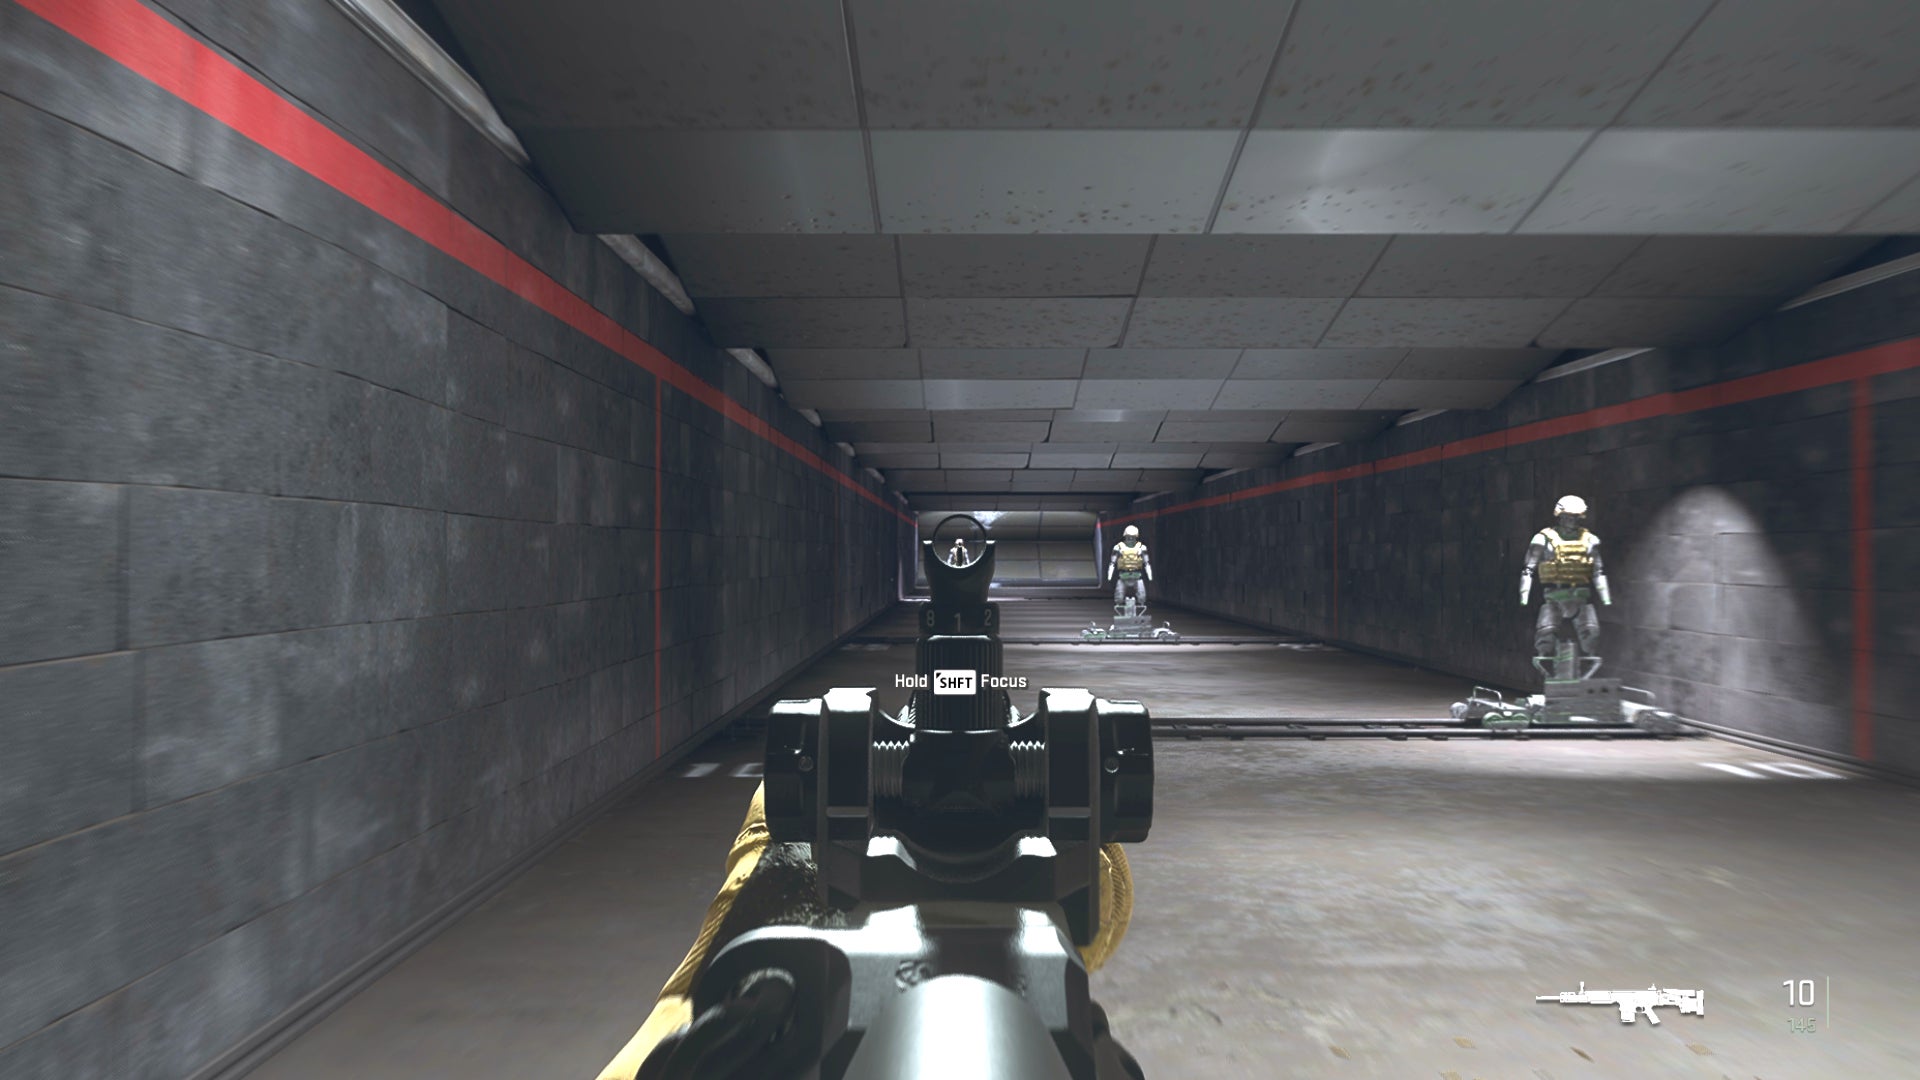 The player in Warzone 2.0 aims at a training dummy with the TAQ-M ironsights.